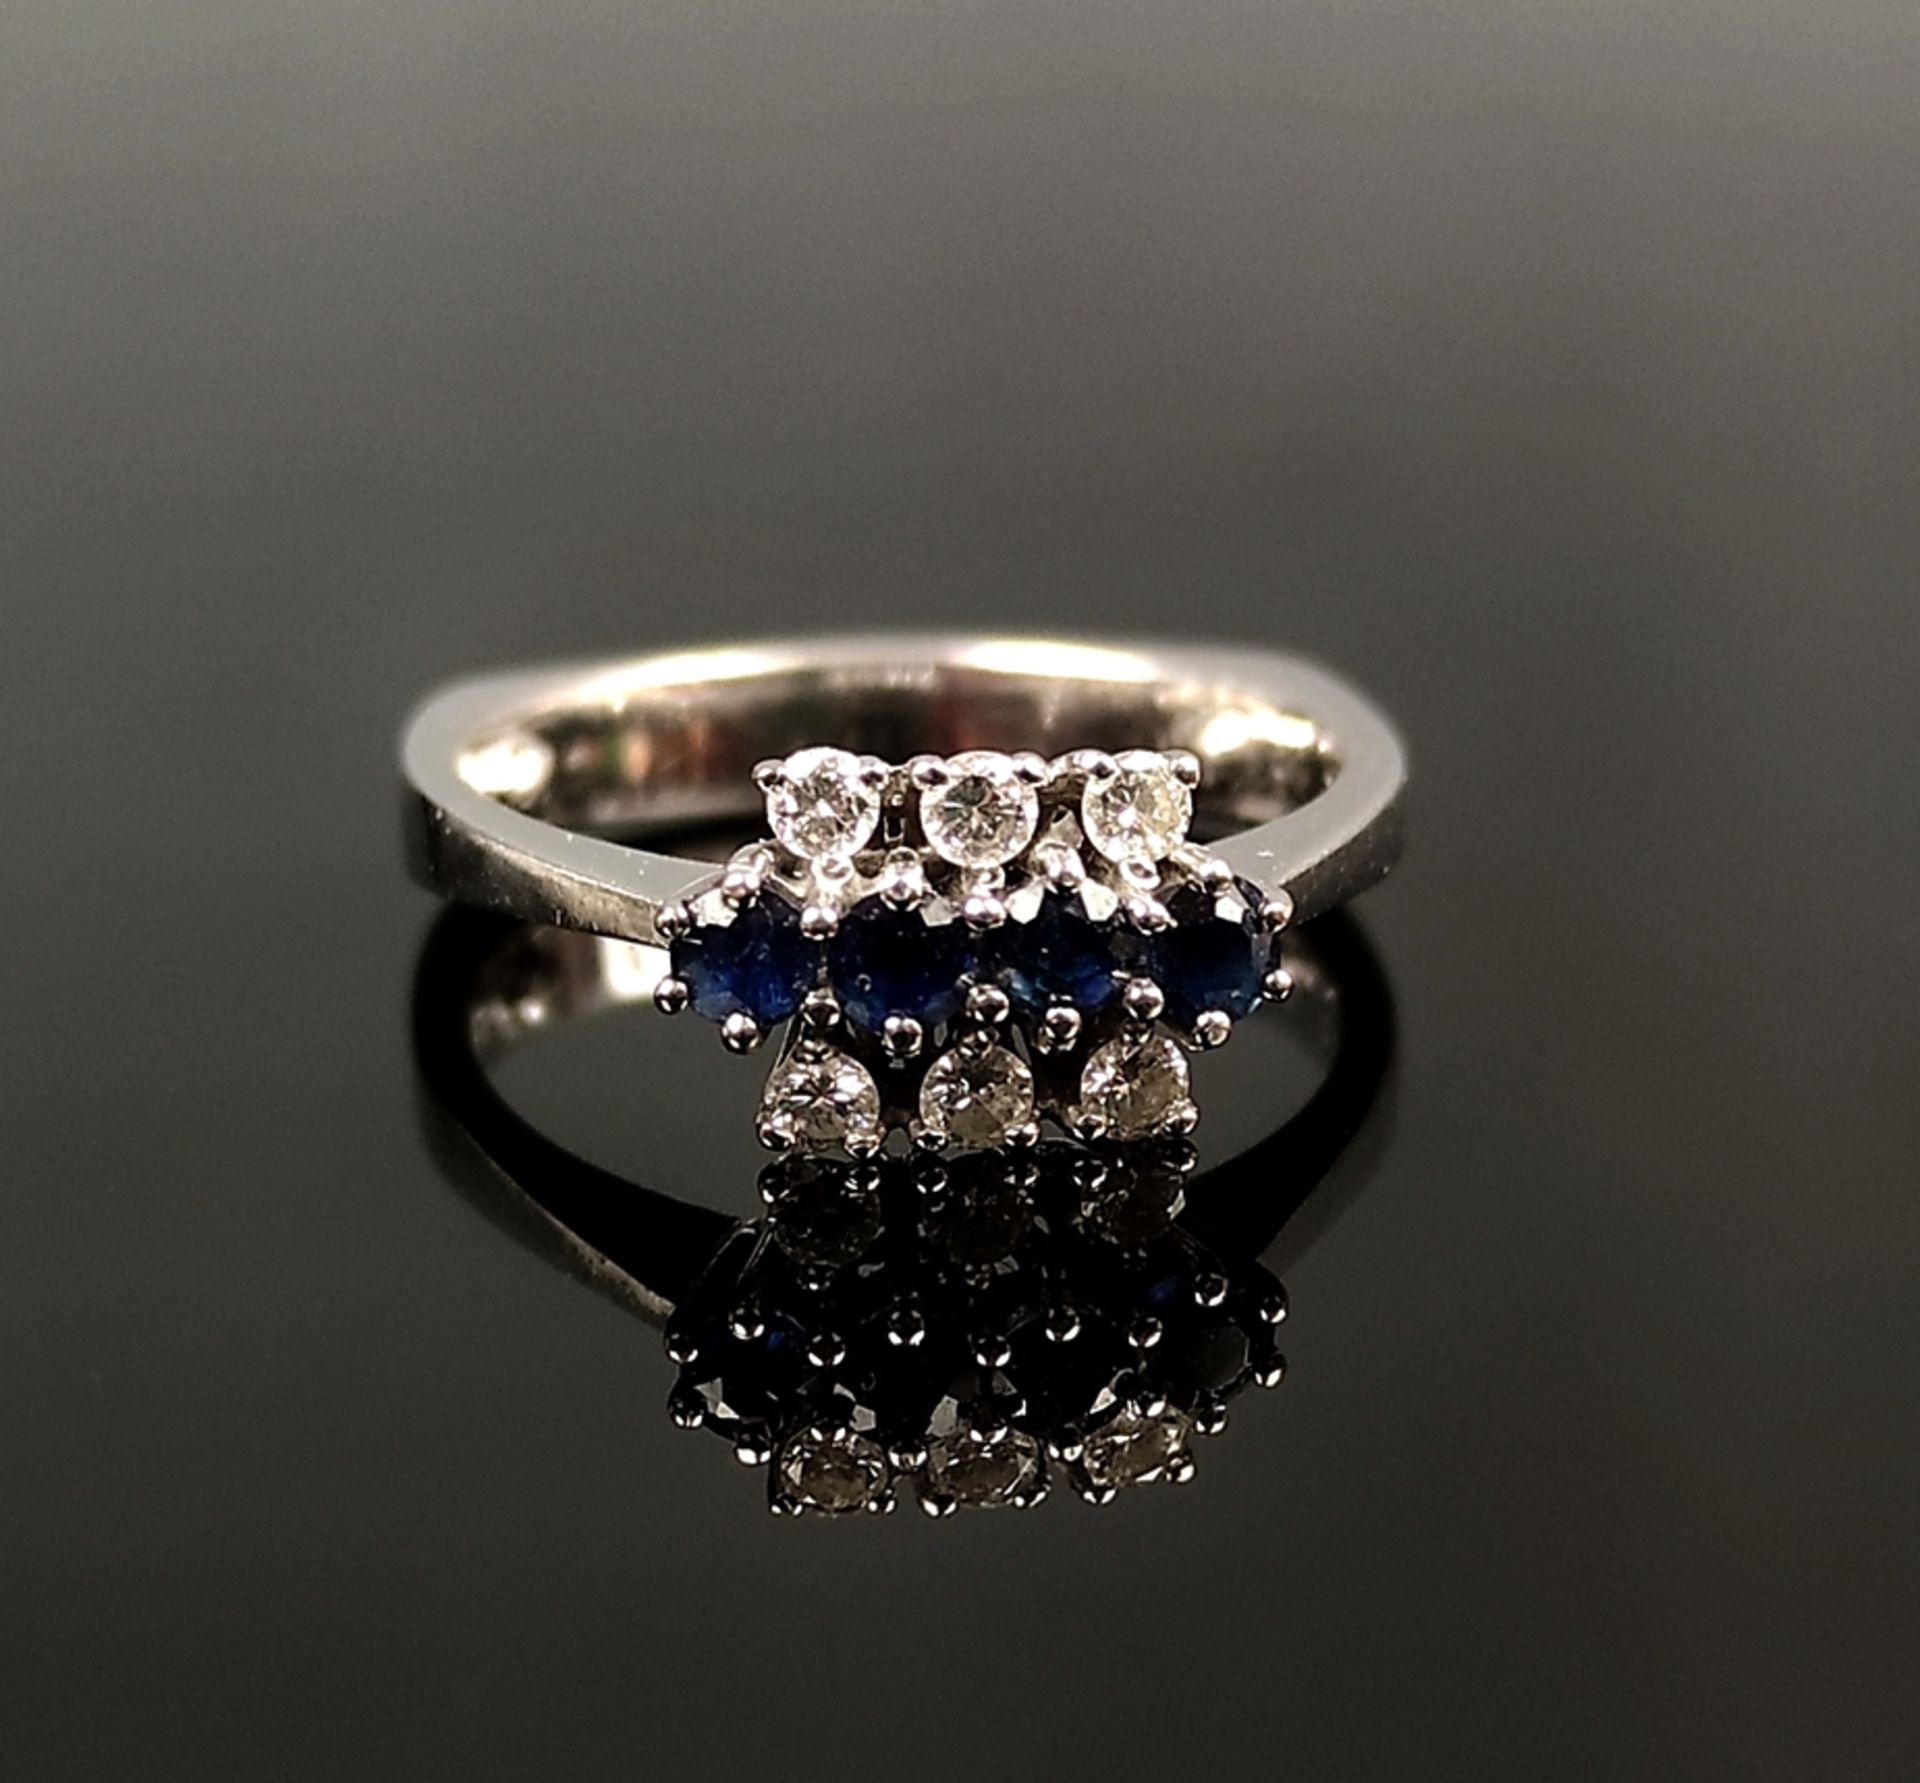 Diamond-sapphire ring, 585/14K white gold, 3.6g, set with 6 diamonds and 4 sapphires, square ring b - Image 2 of 4